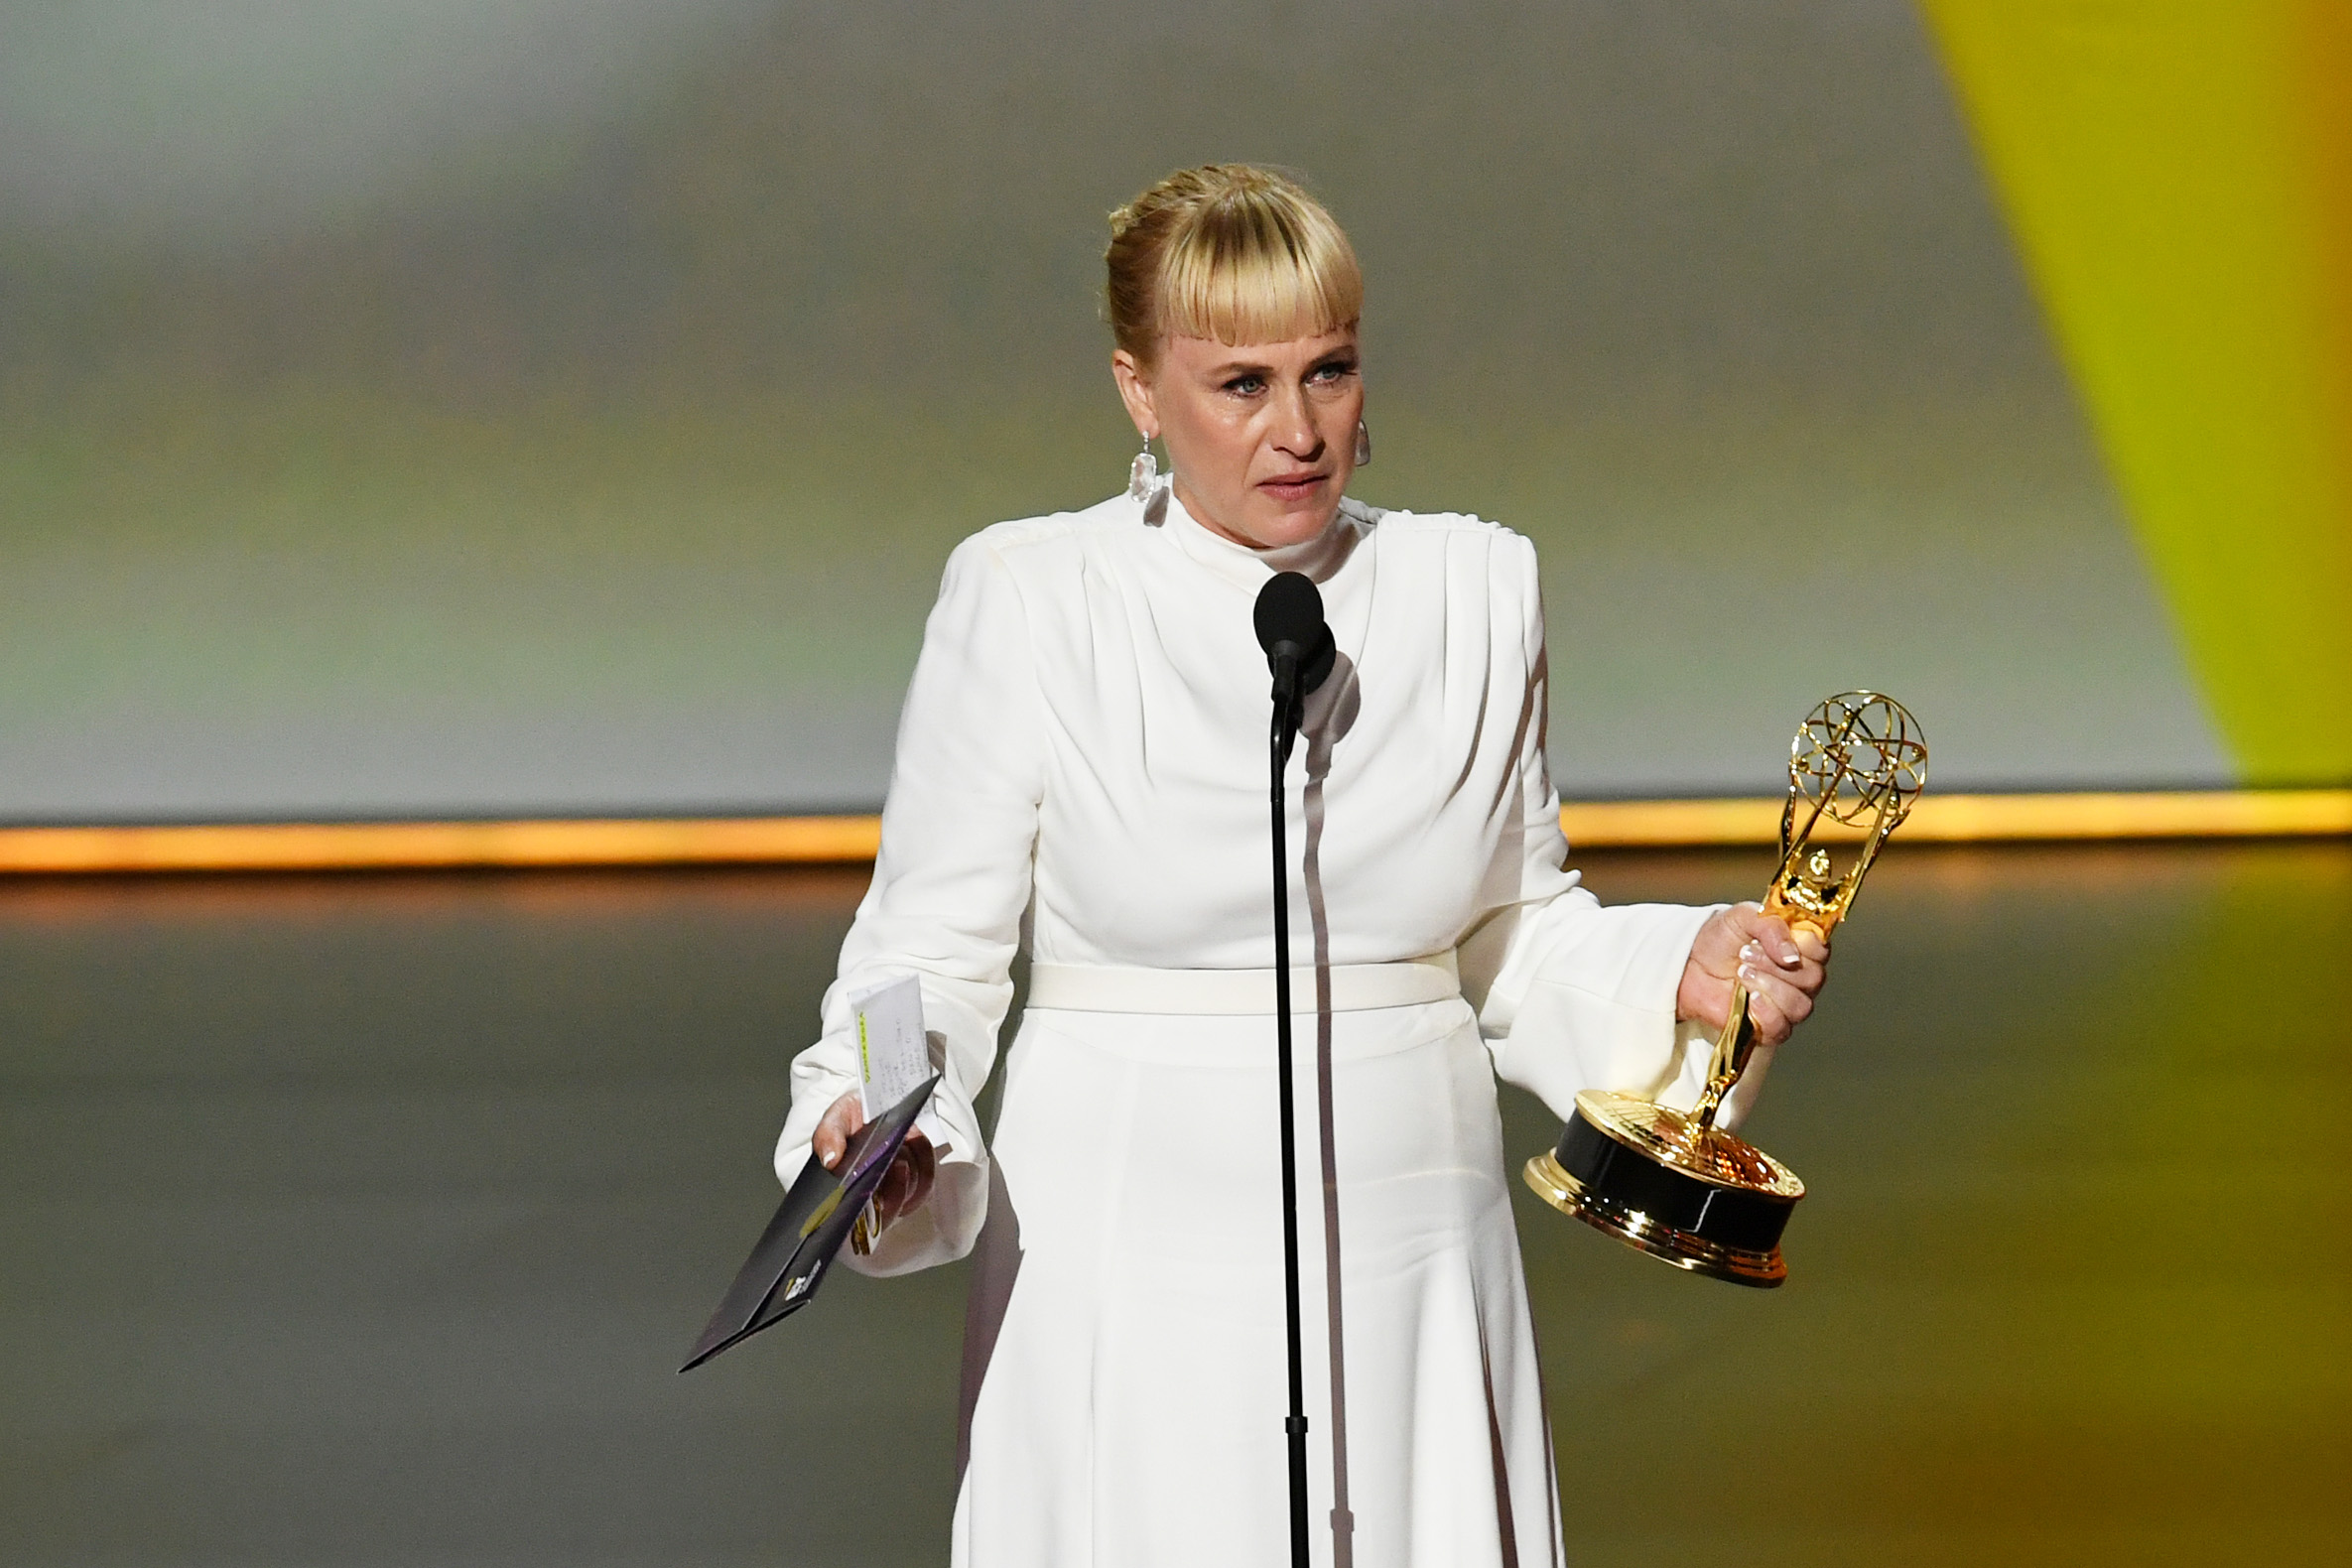 Patricia Arquette speaks out for transgender rights while accepting the Emmy for Supporting Actress in a Limited Series or Movie for 'The Act' during the 71st Emmys. (Kevin Winter—Getty Images)